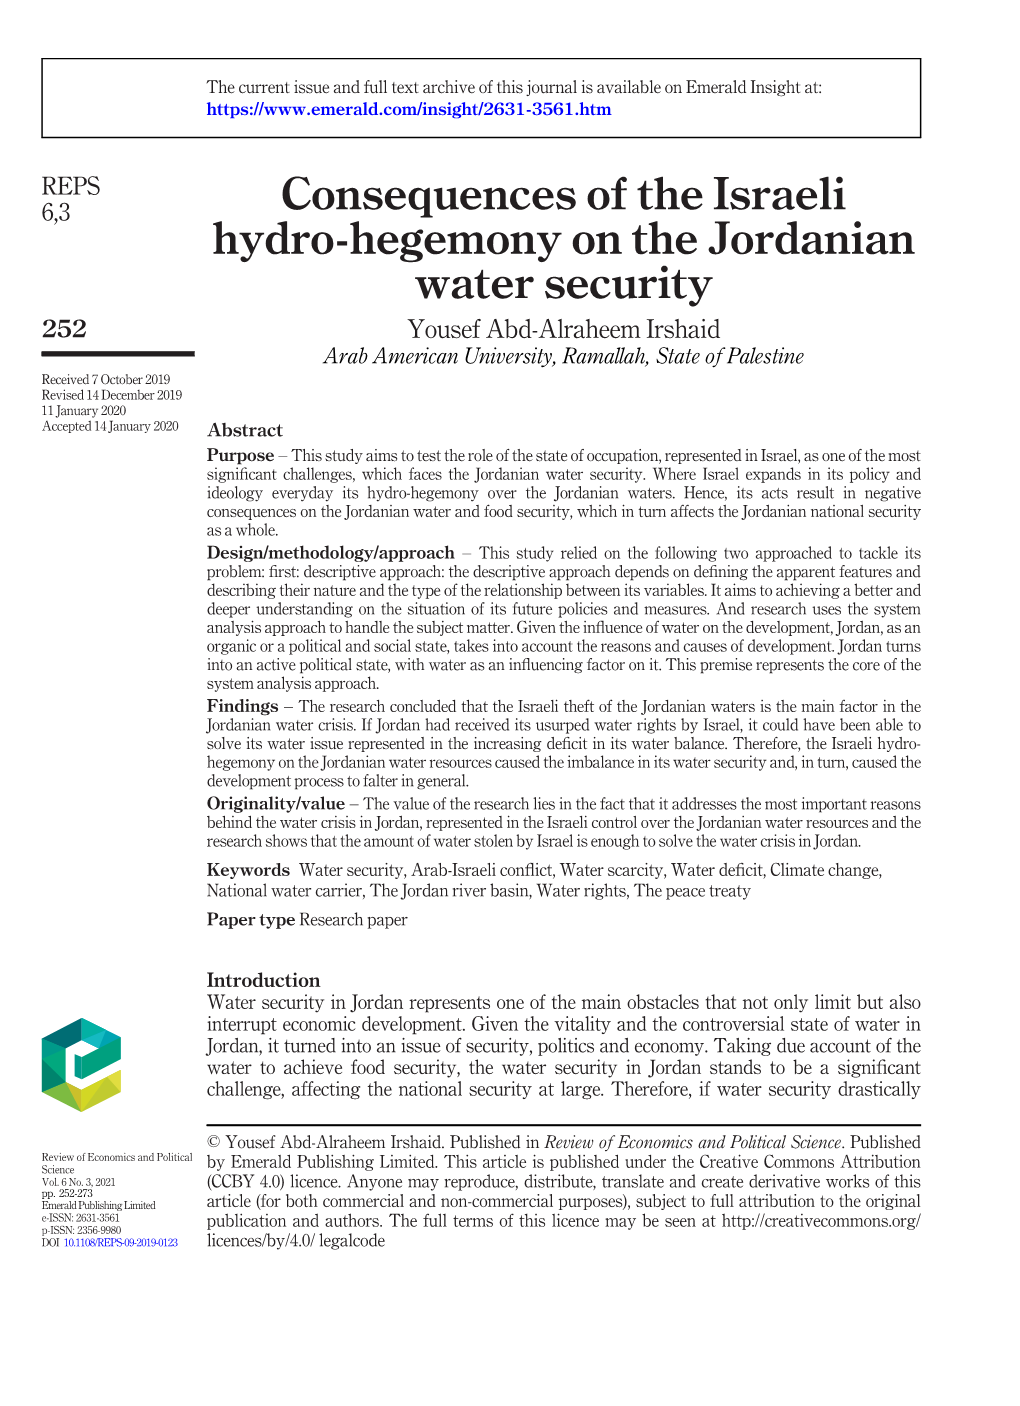 Consequences of the Israeli Hydro-Hegemony on the Jordanian